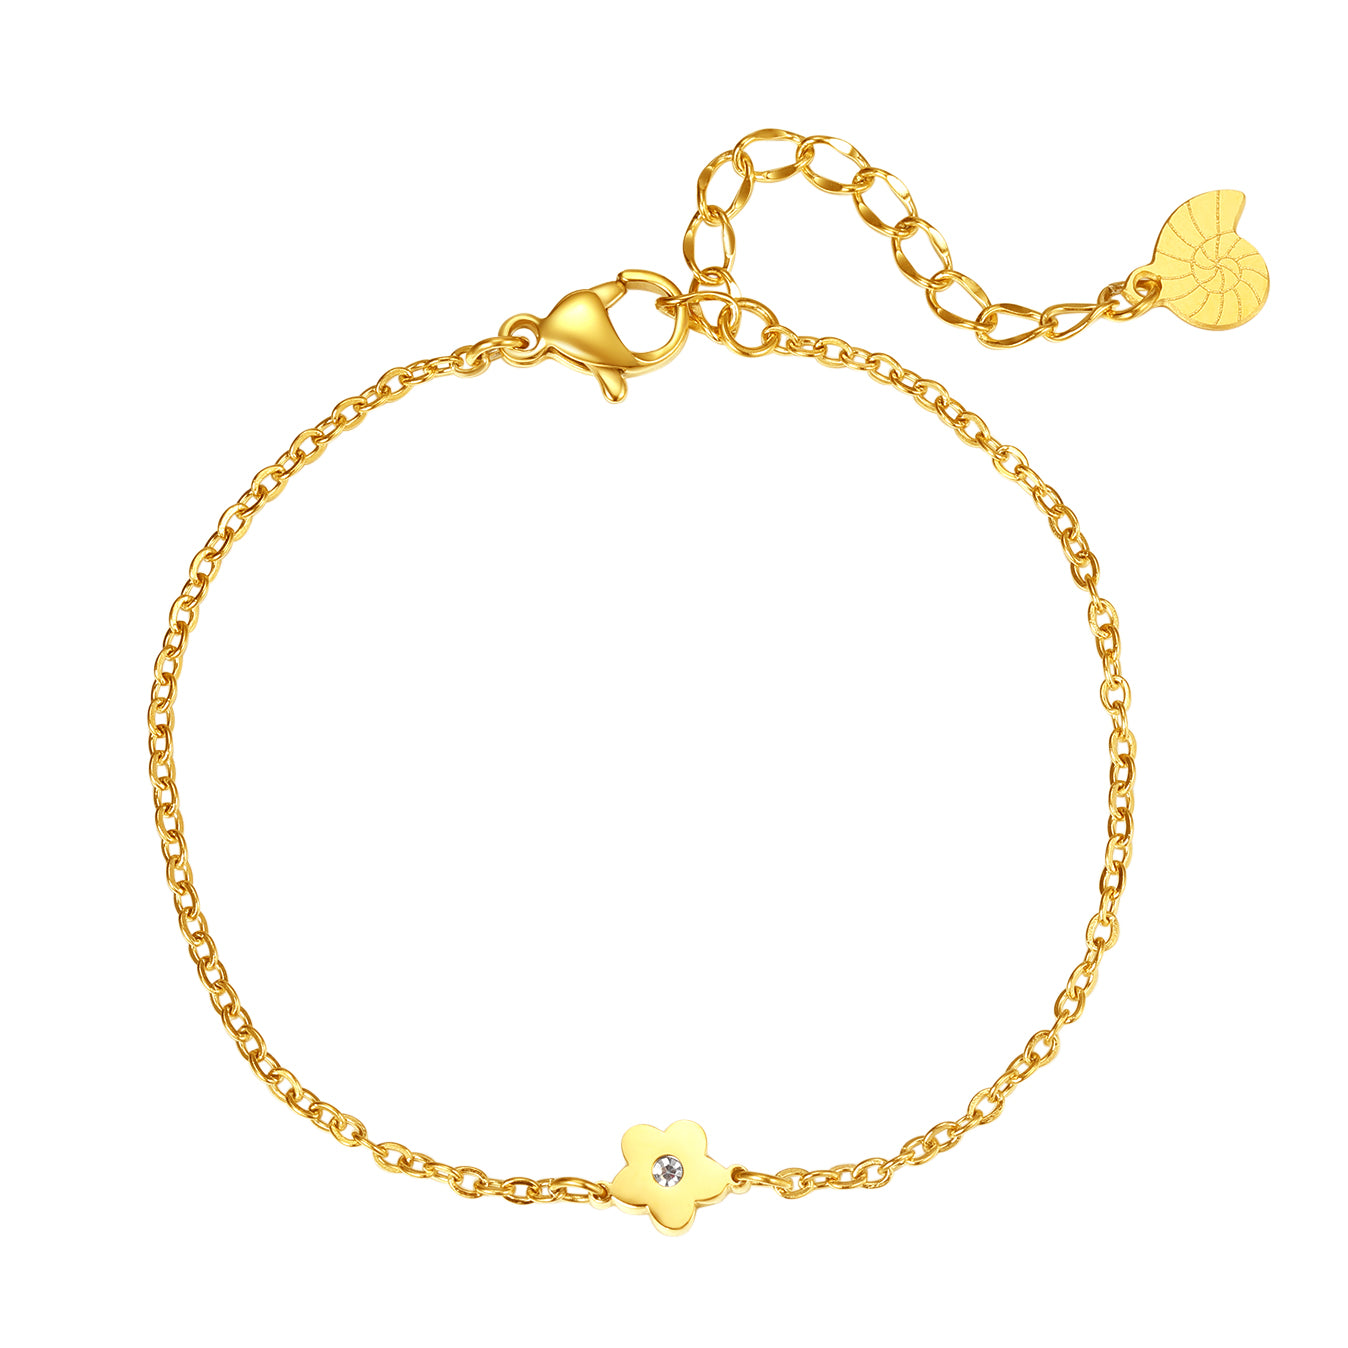 Filigranes Armband Blume in Gold